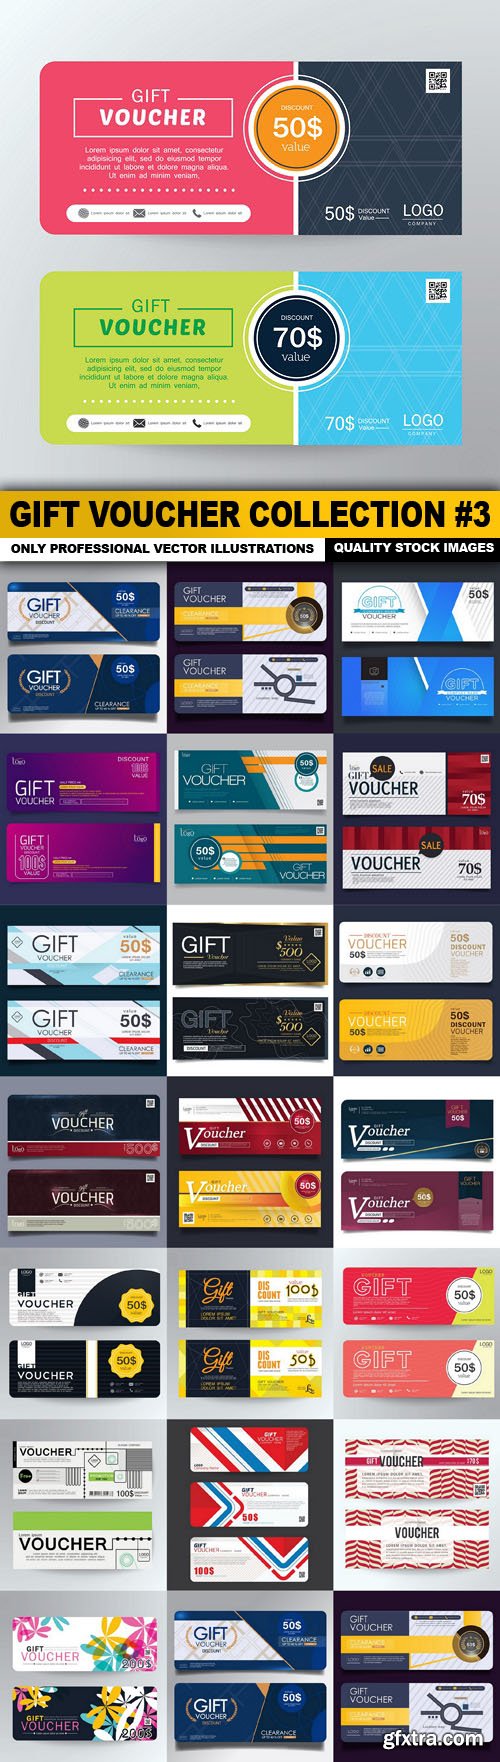 Gift Voucher Collection #3 - 20 Vector